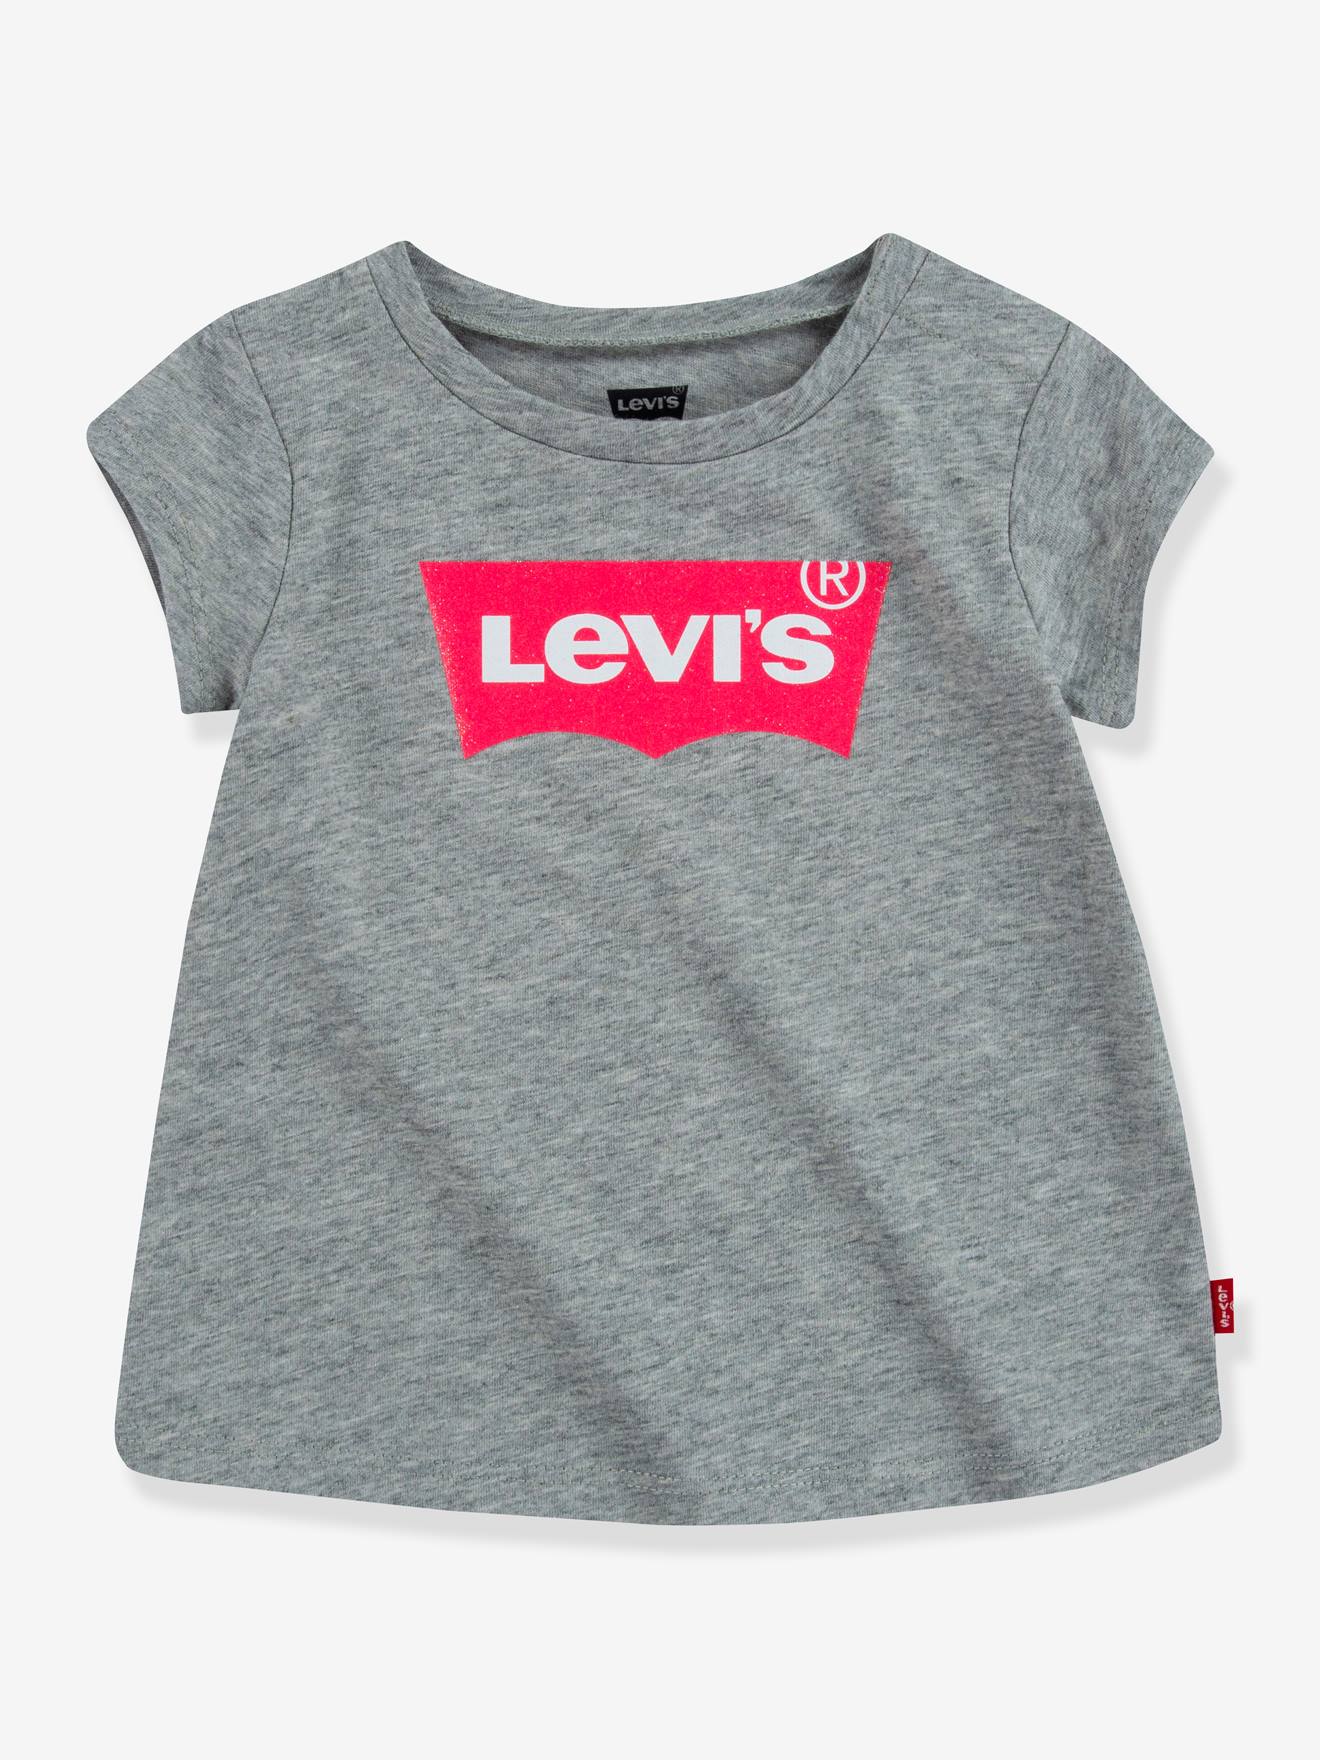 Batwing T-Shirt for Babies by Levi’s(r) grey